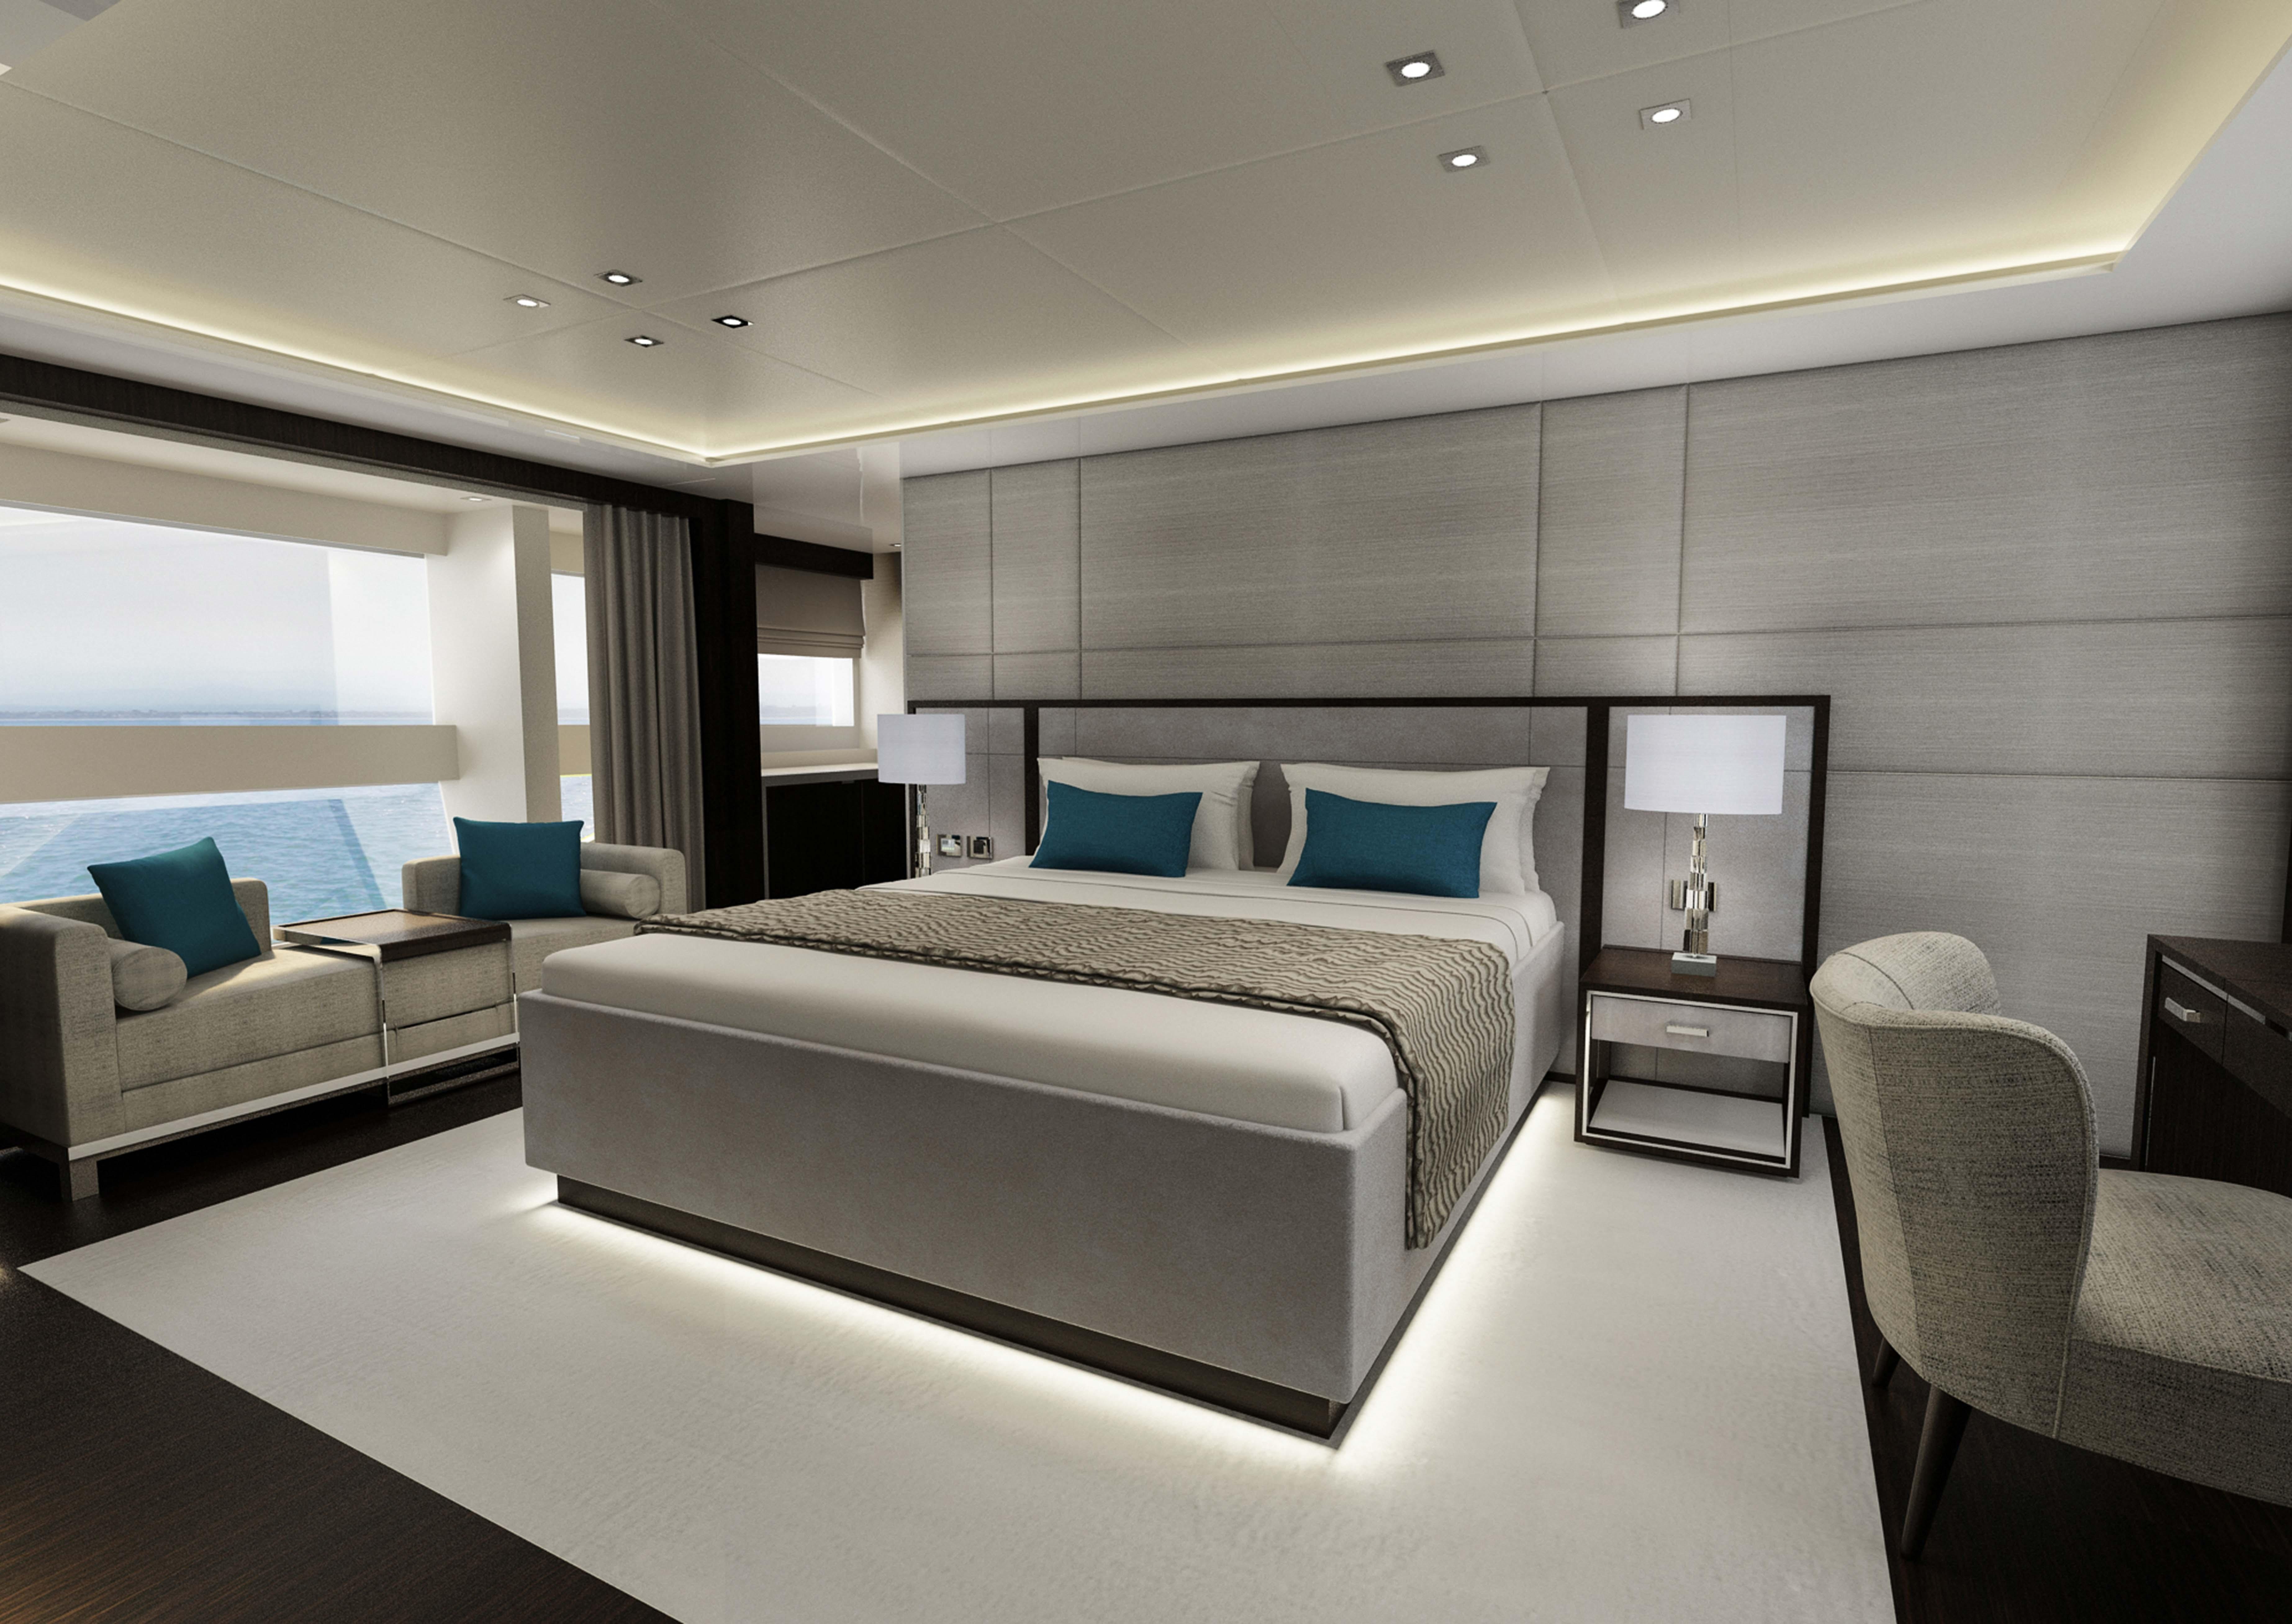  Yacht Photos Pics Manufacturer Provided Image: Sunseeker 116 Yacht Master Cabin